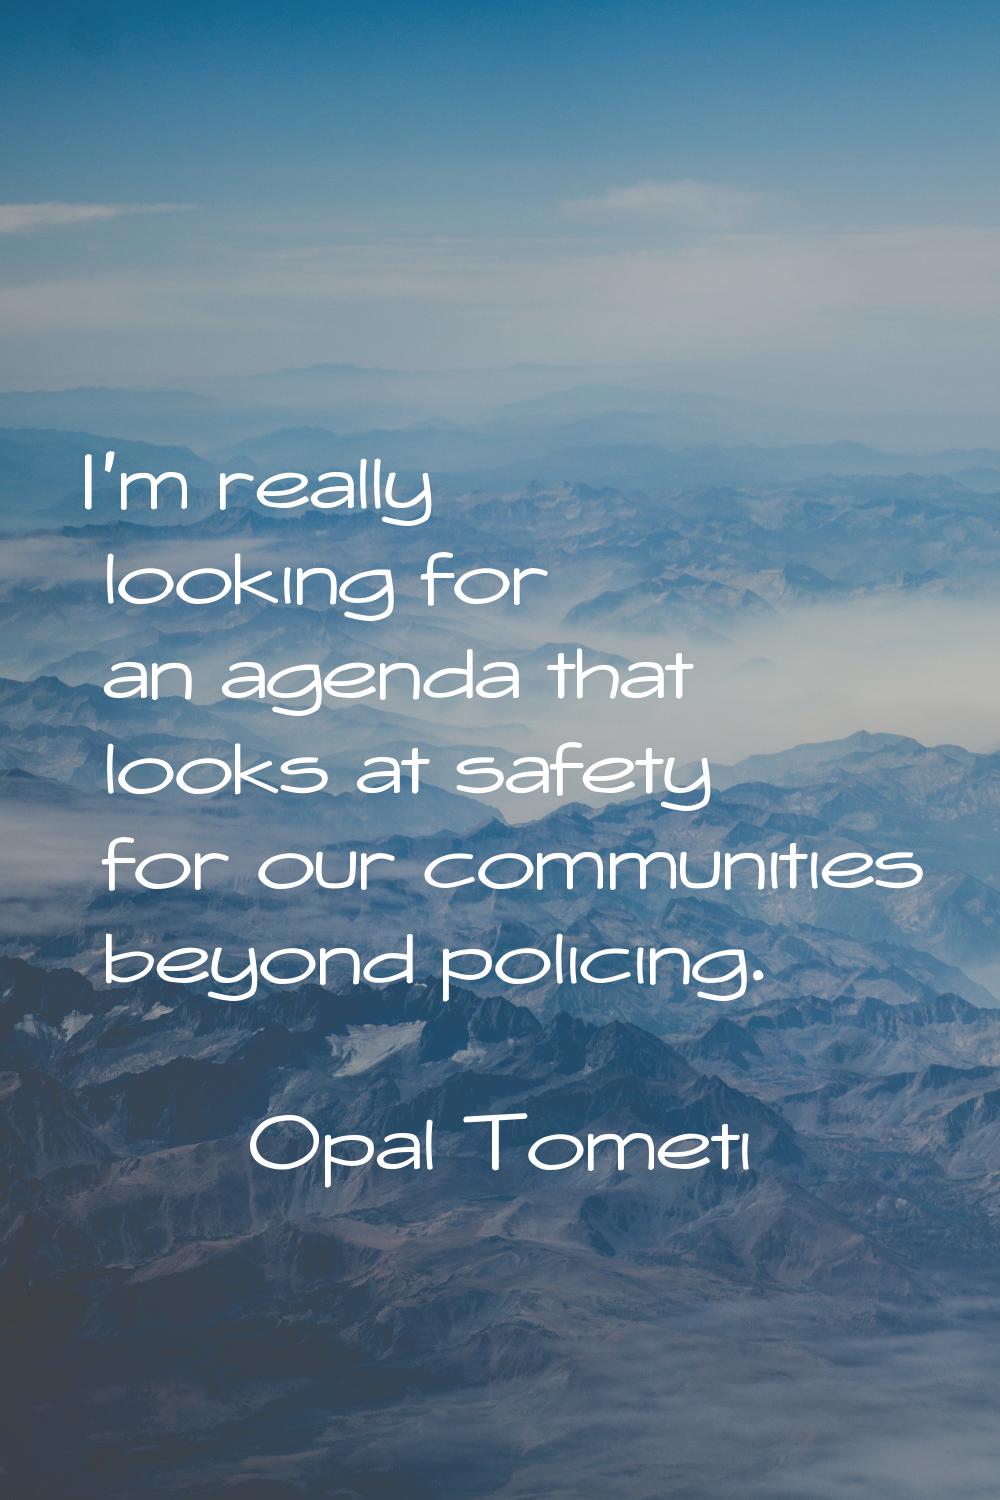 I'm really looking for an agenda that looks at safety for our communities beyond policing.